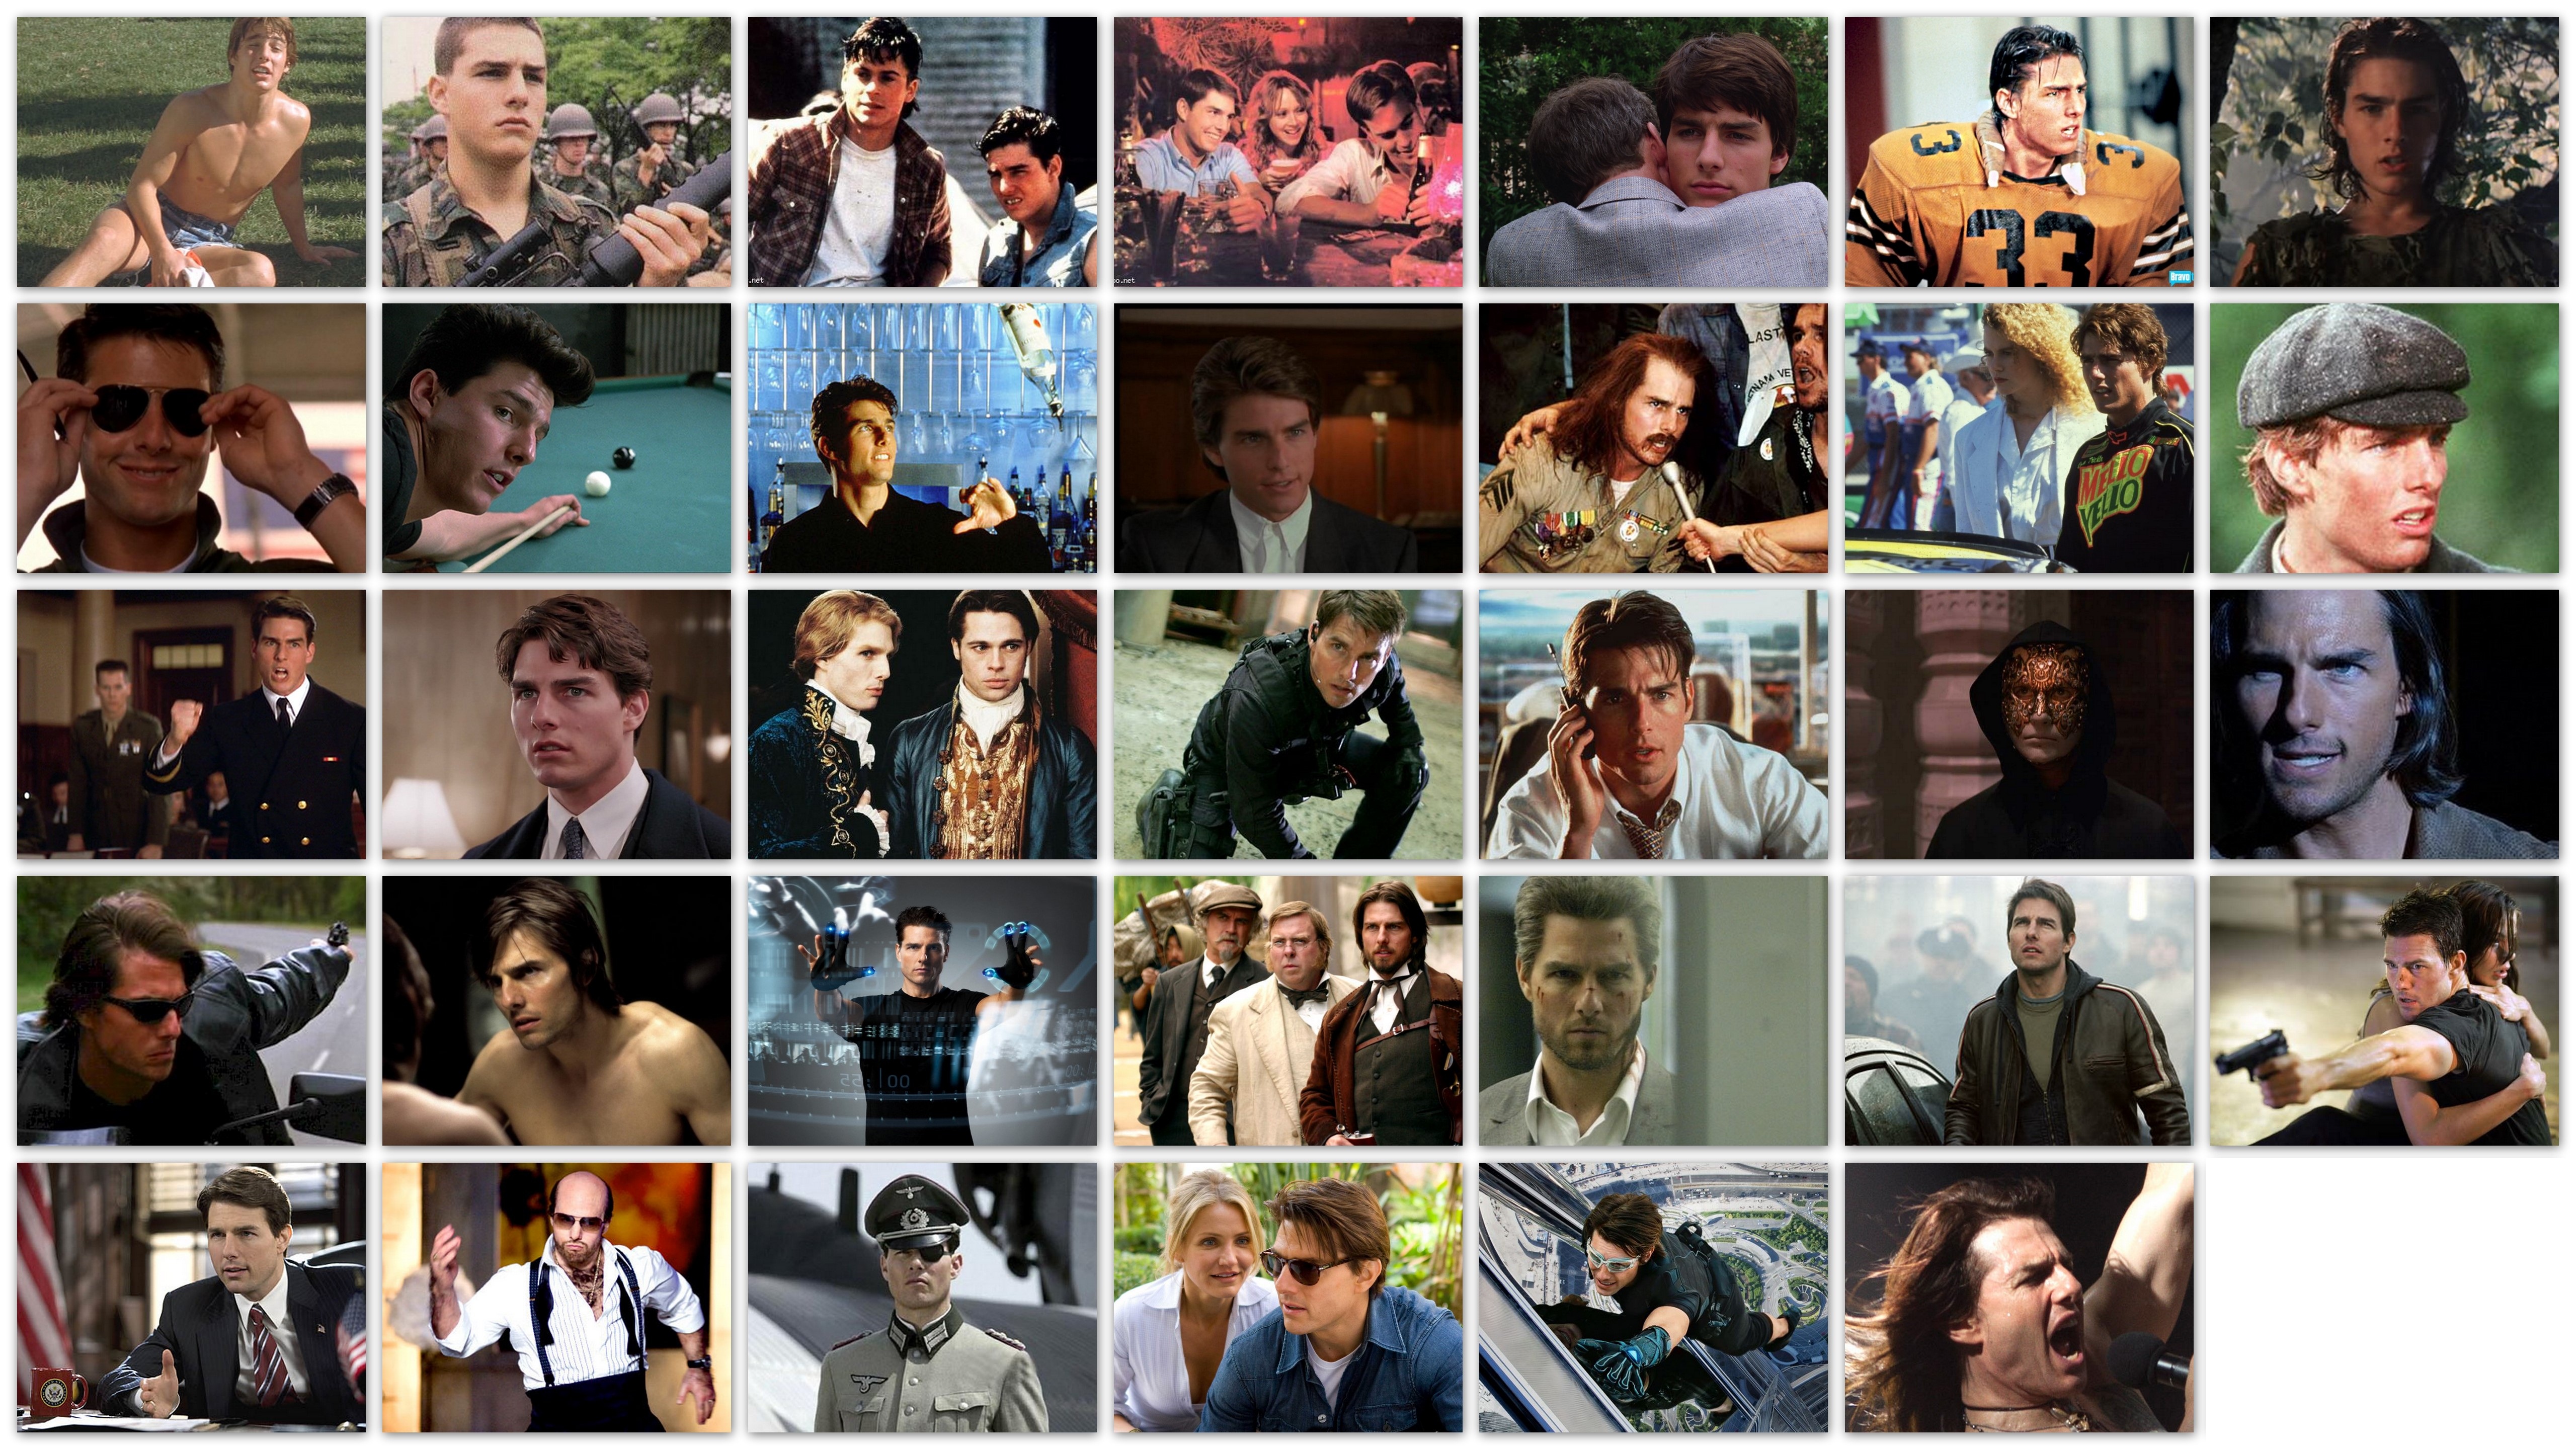 Overview of the roles of actor Tom Cruise